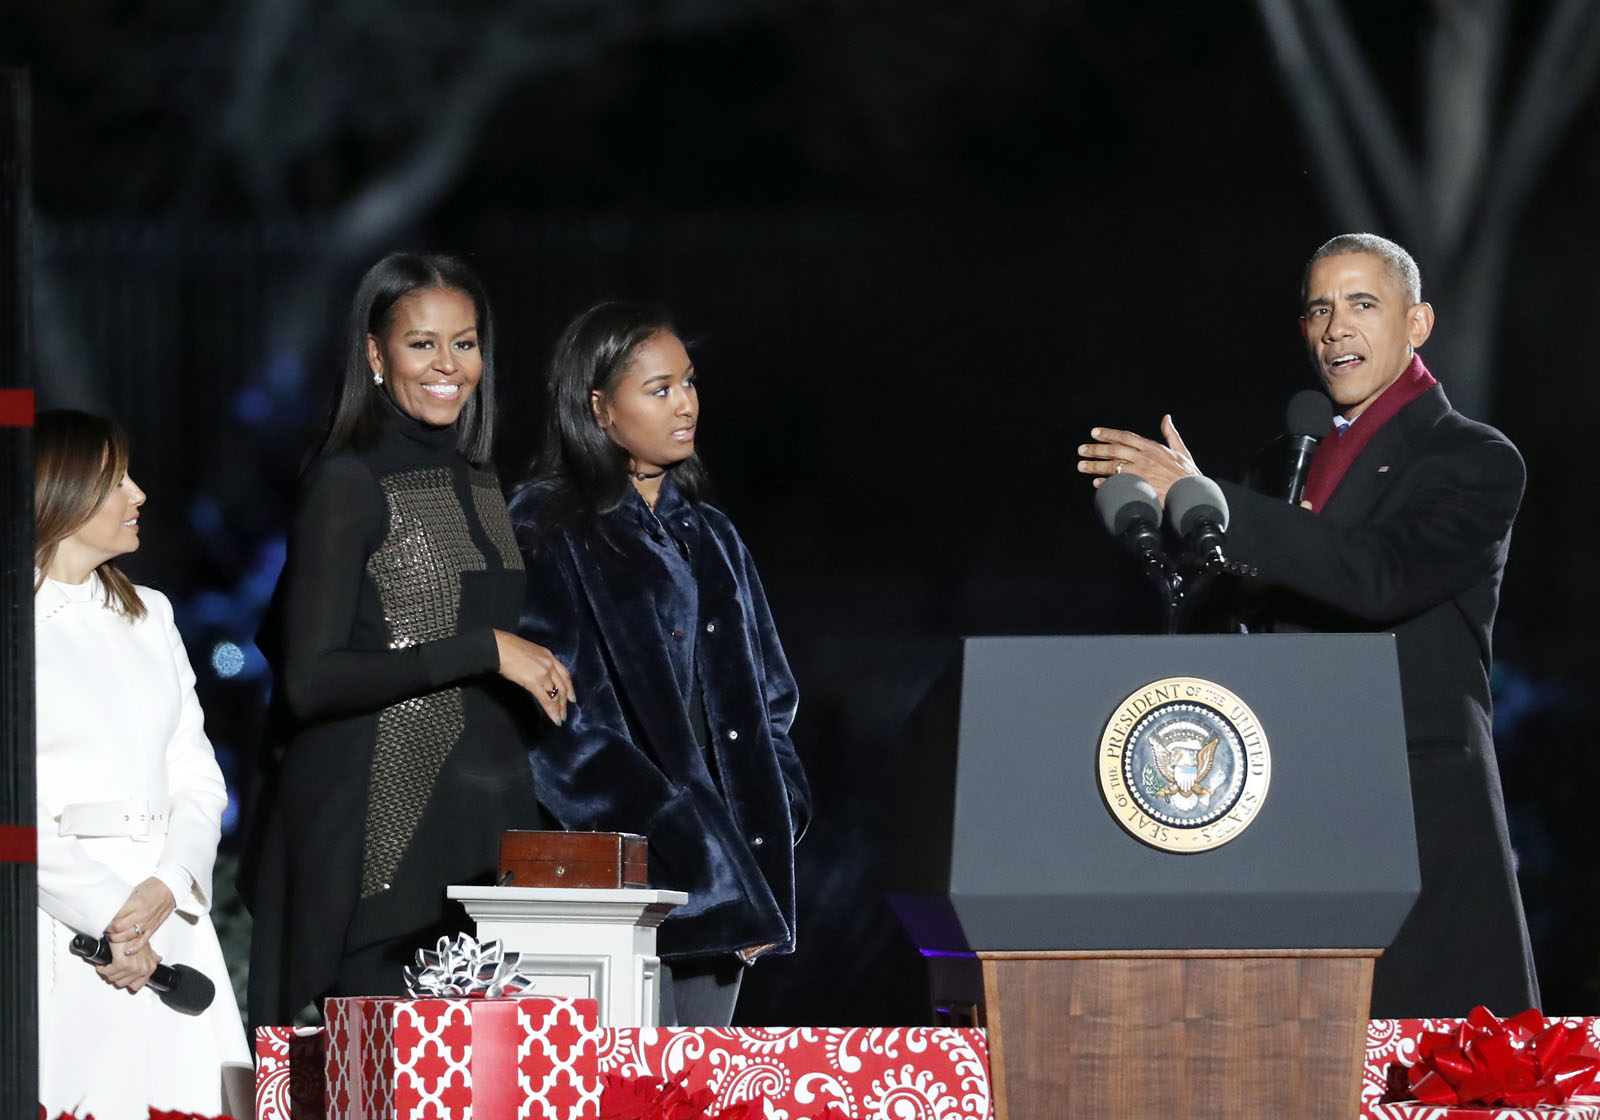 President Barack Obama, right, speaks, with Michelle Obama, and daughter Sasha, and entertainer Eva Longoria during the lighting ceremony for the 2016 National Christmas Tree is seen before the lighting ceremony on the Ellipse near the White House, Thursday, Dec. 1, 2016 in Washington. (AP Photo/Alex Brandon)